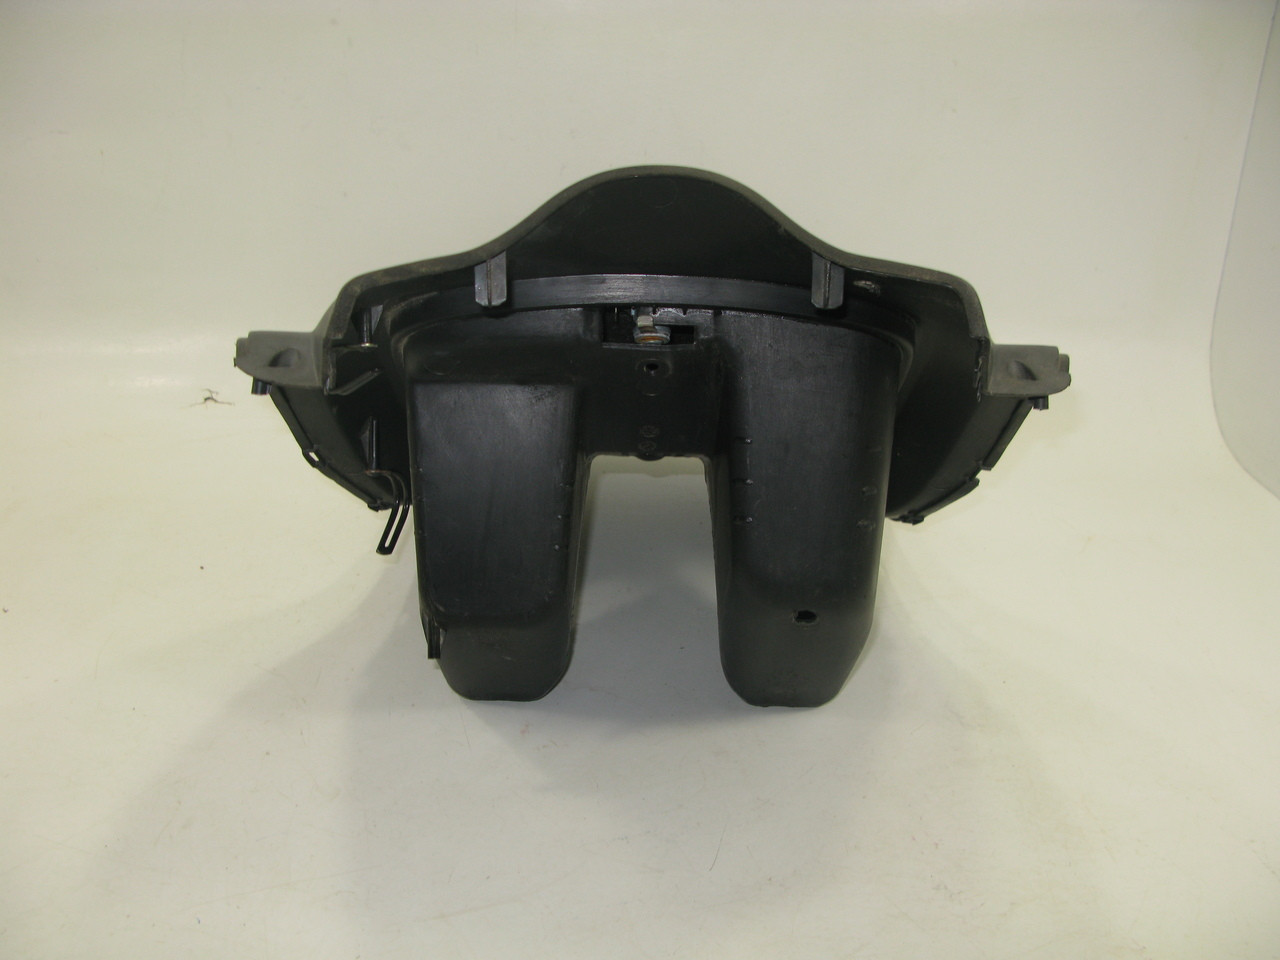 Kymco Scooter 81131-KEB7-9000 Leg Shield Glove Compartment